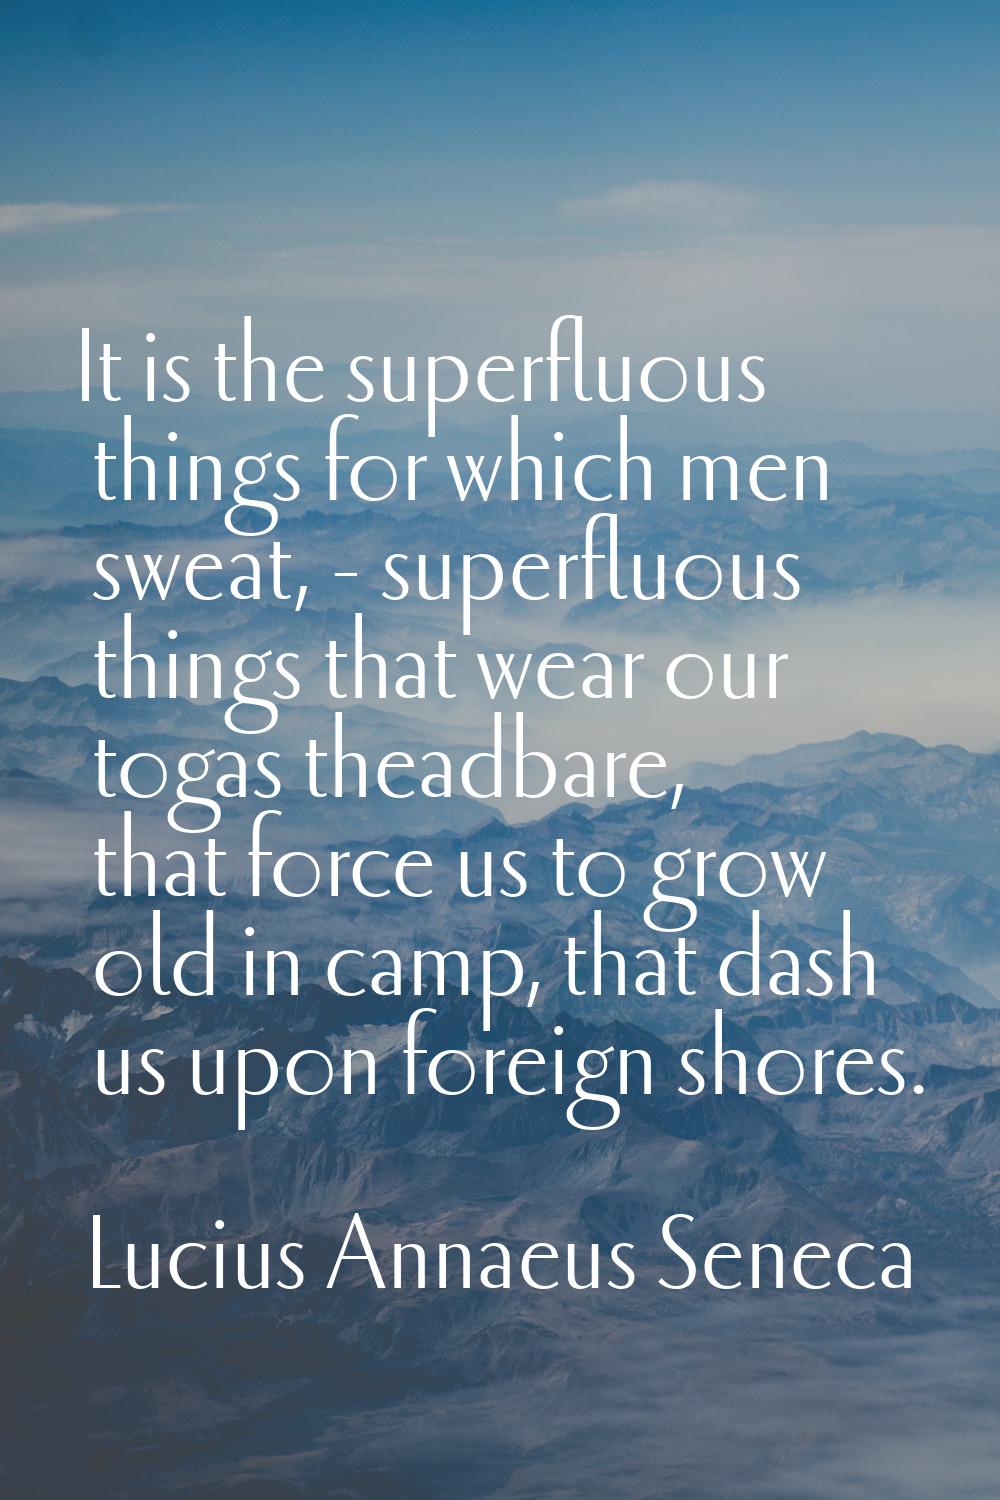 It is the superfluous things for which men sweat, - superfluous things that wear our togas theadbar